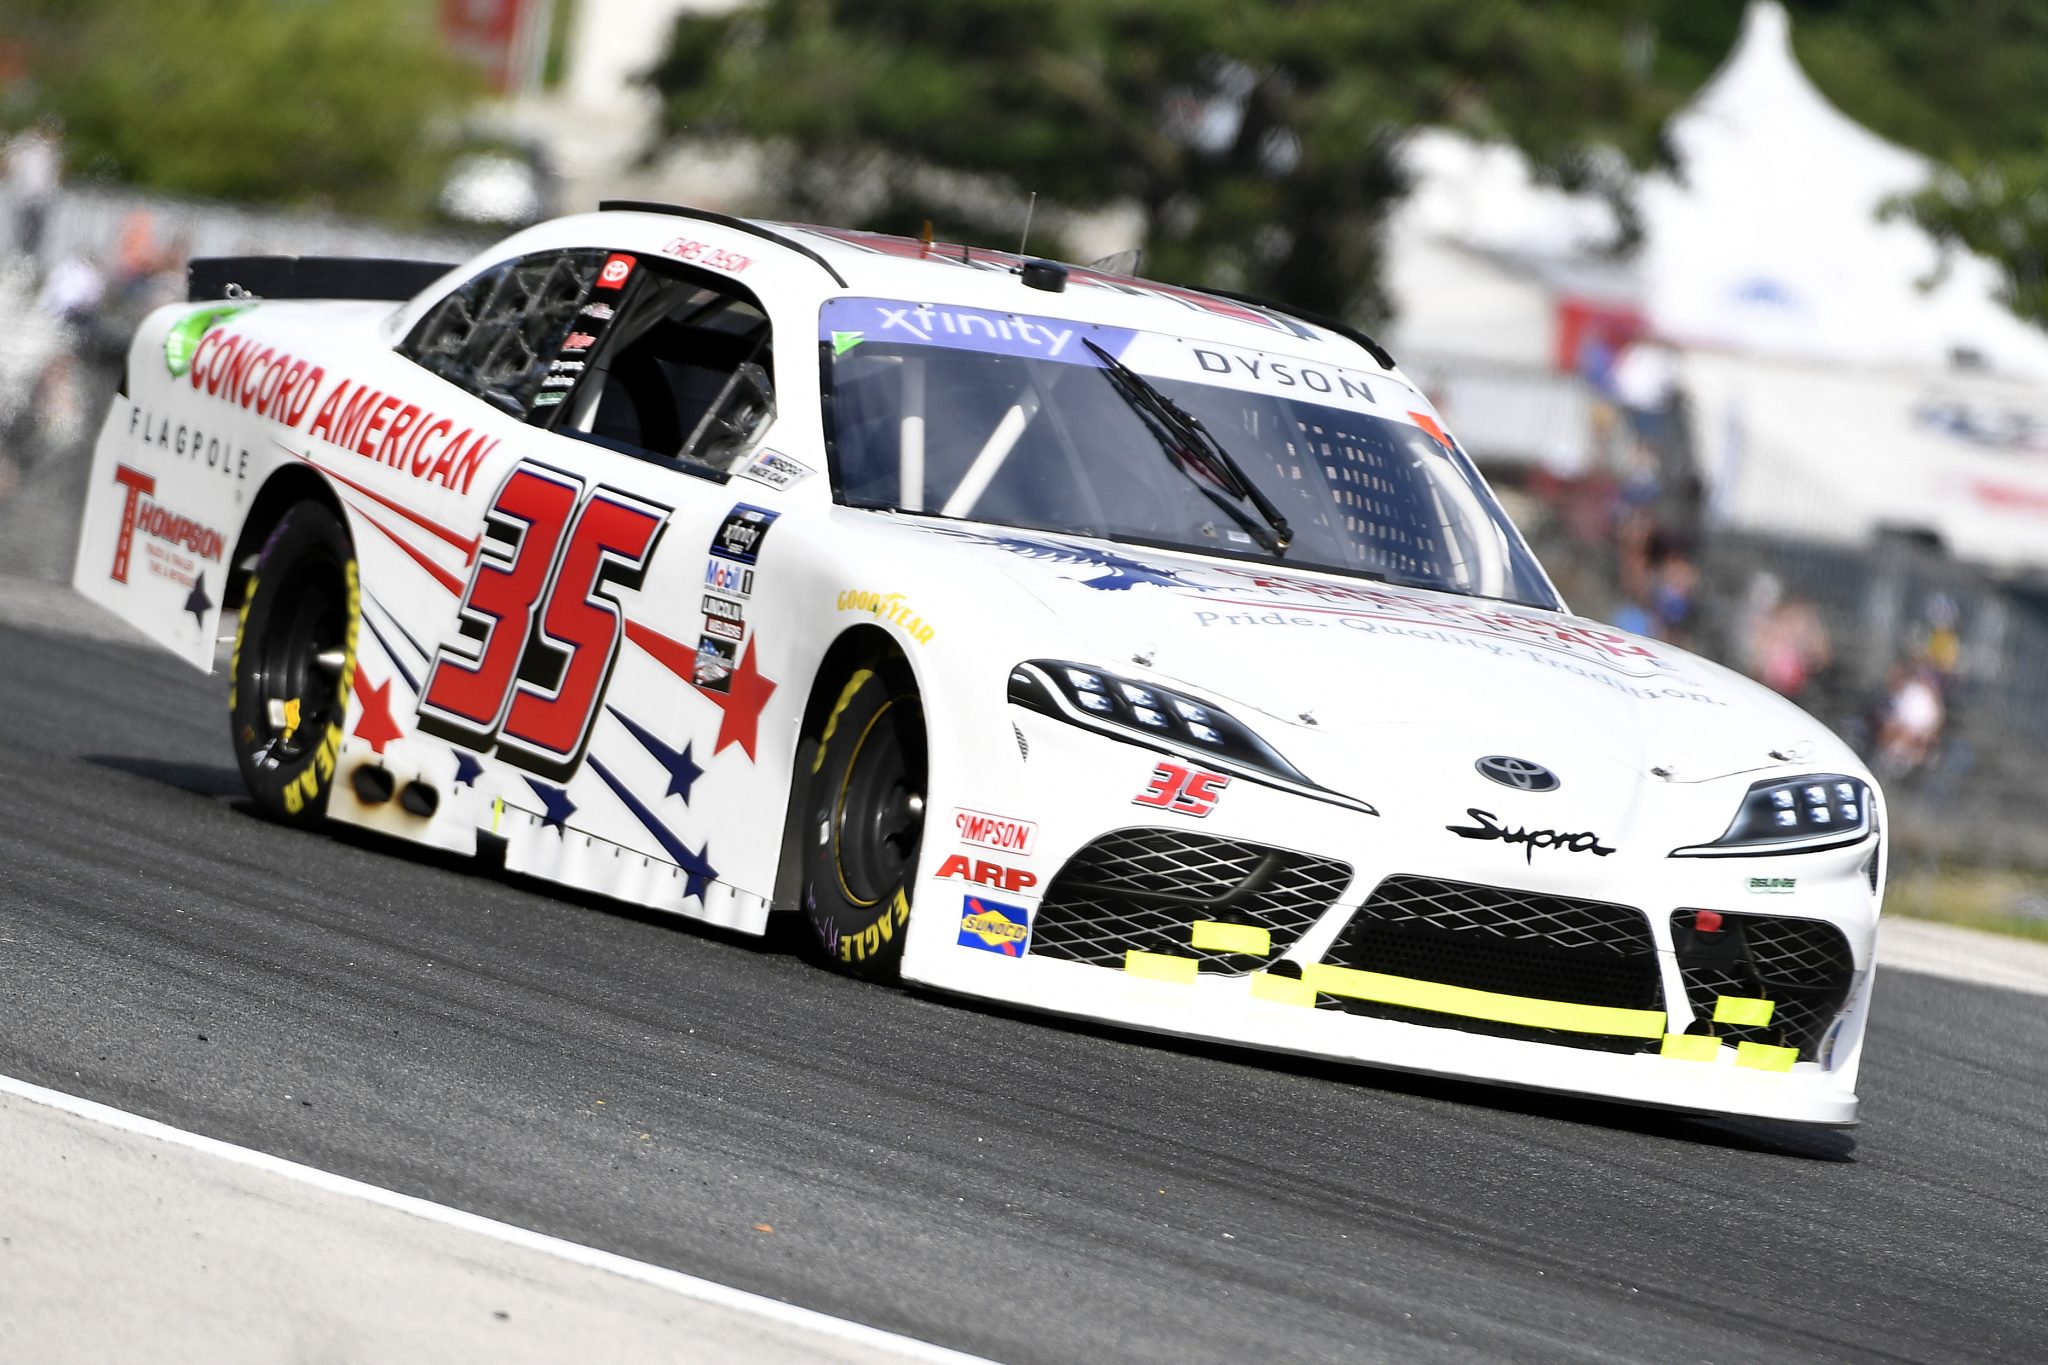 ELKHART LAKE, WISCONSIN - JULY 01: Chris Dyson, driver of the #35 Concord American Flagpole Chevrolet, drives during qualifying for the NASCAR Xfinity Series Henry 180 at Road America on July 01, 2022 in Elkhart Lake, Wisconsin. (Photo by Logan Riely/Getty Images) | Getty Images